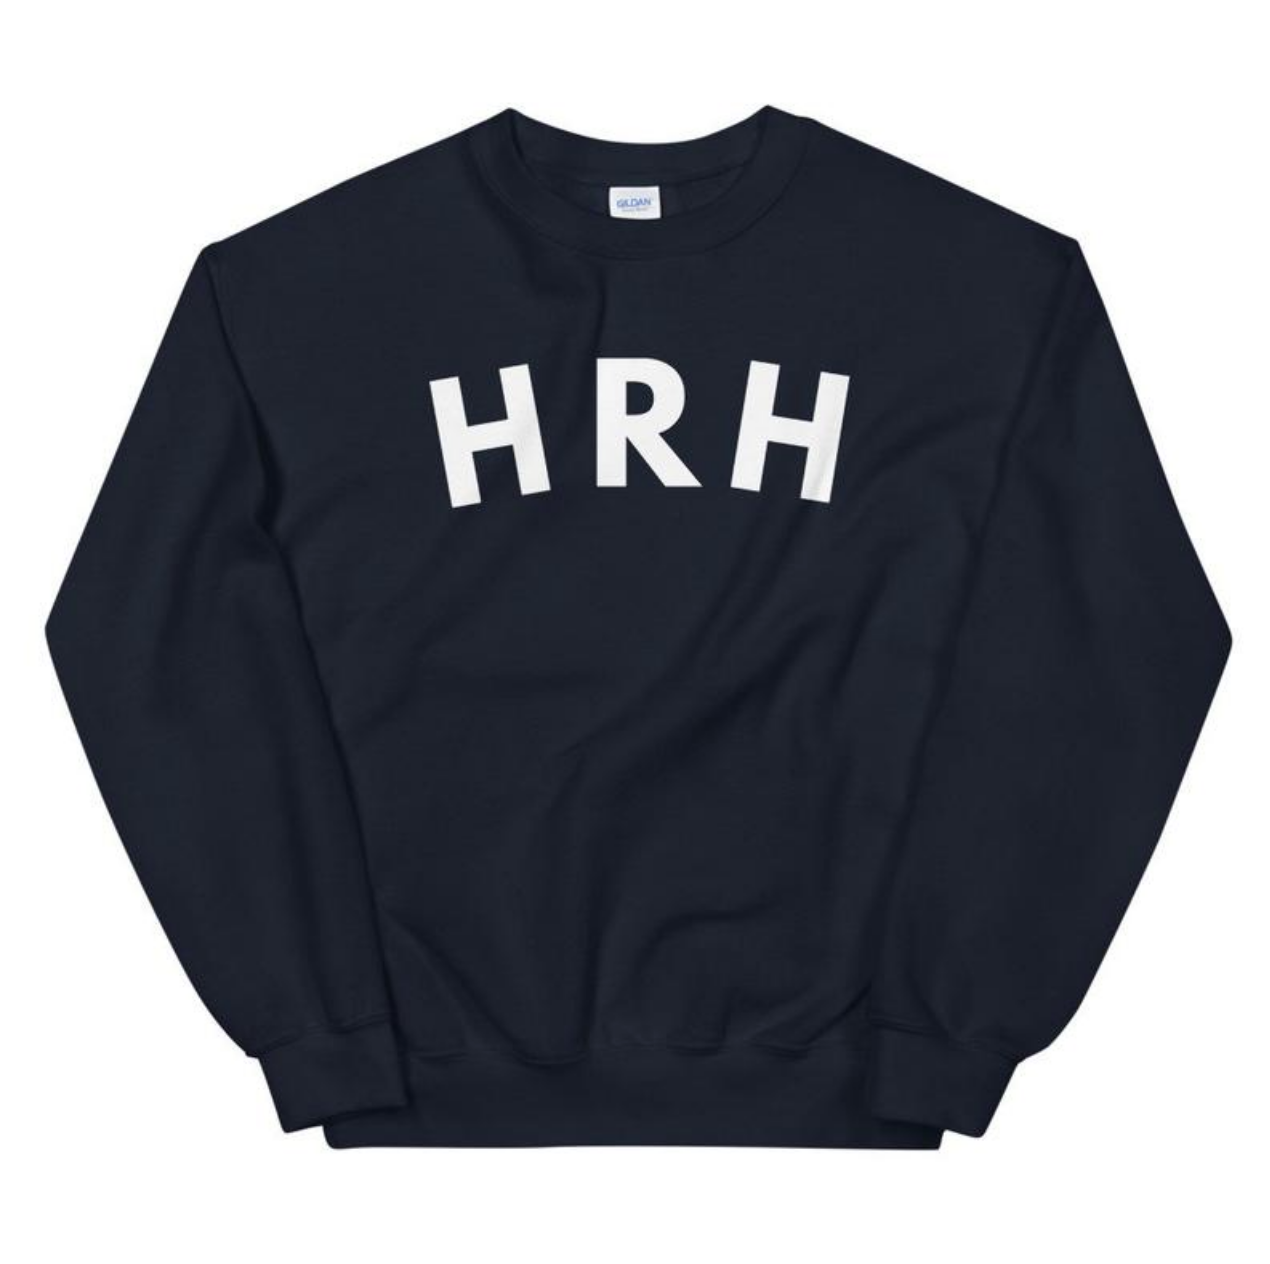 HRH-Sweater-Holiday-Gift-Idea.png